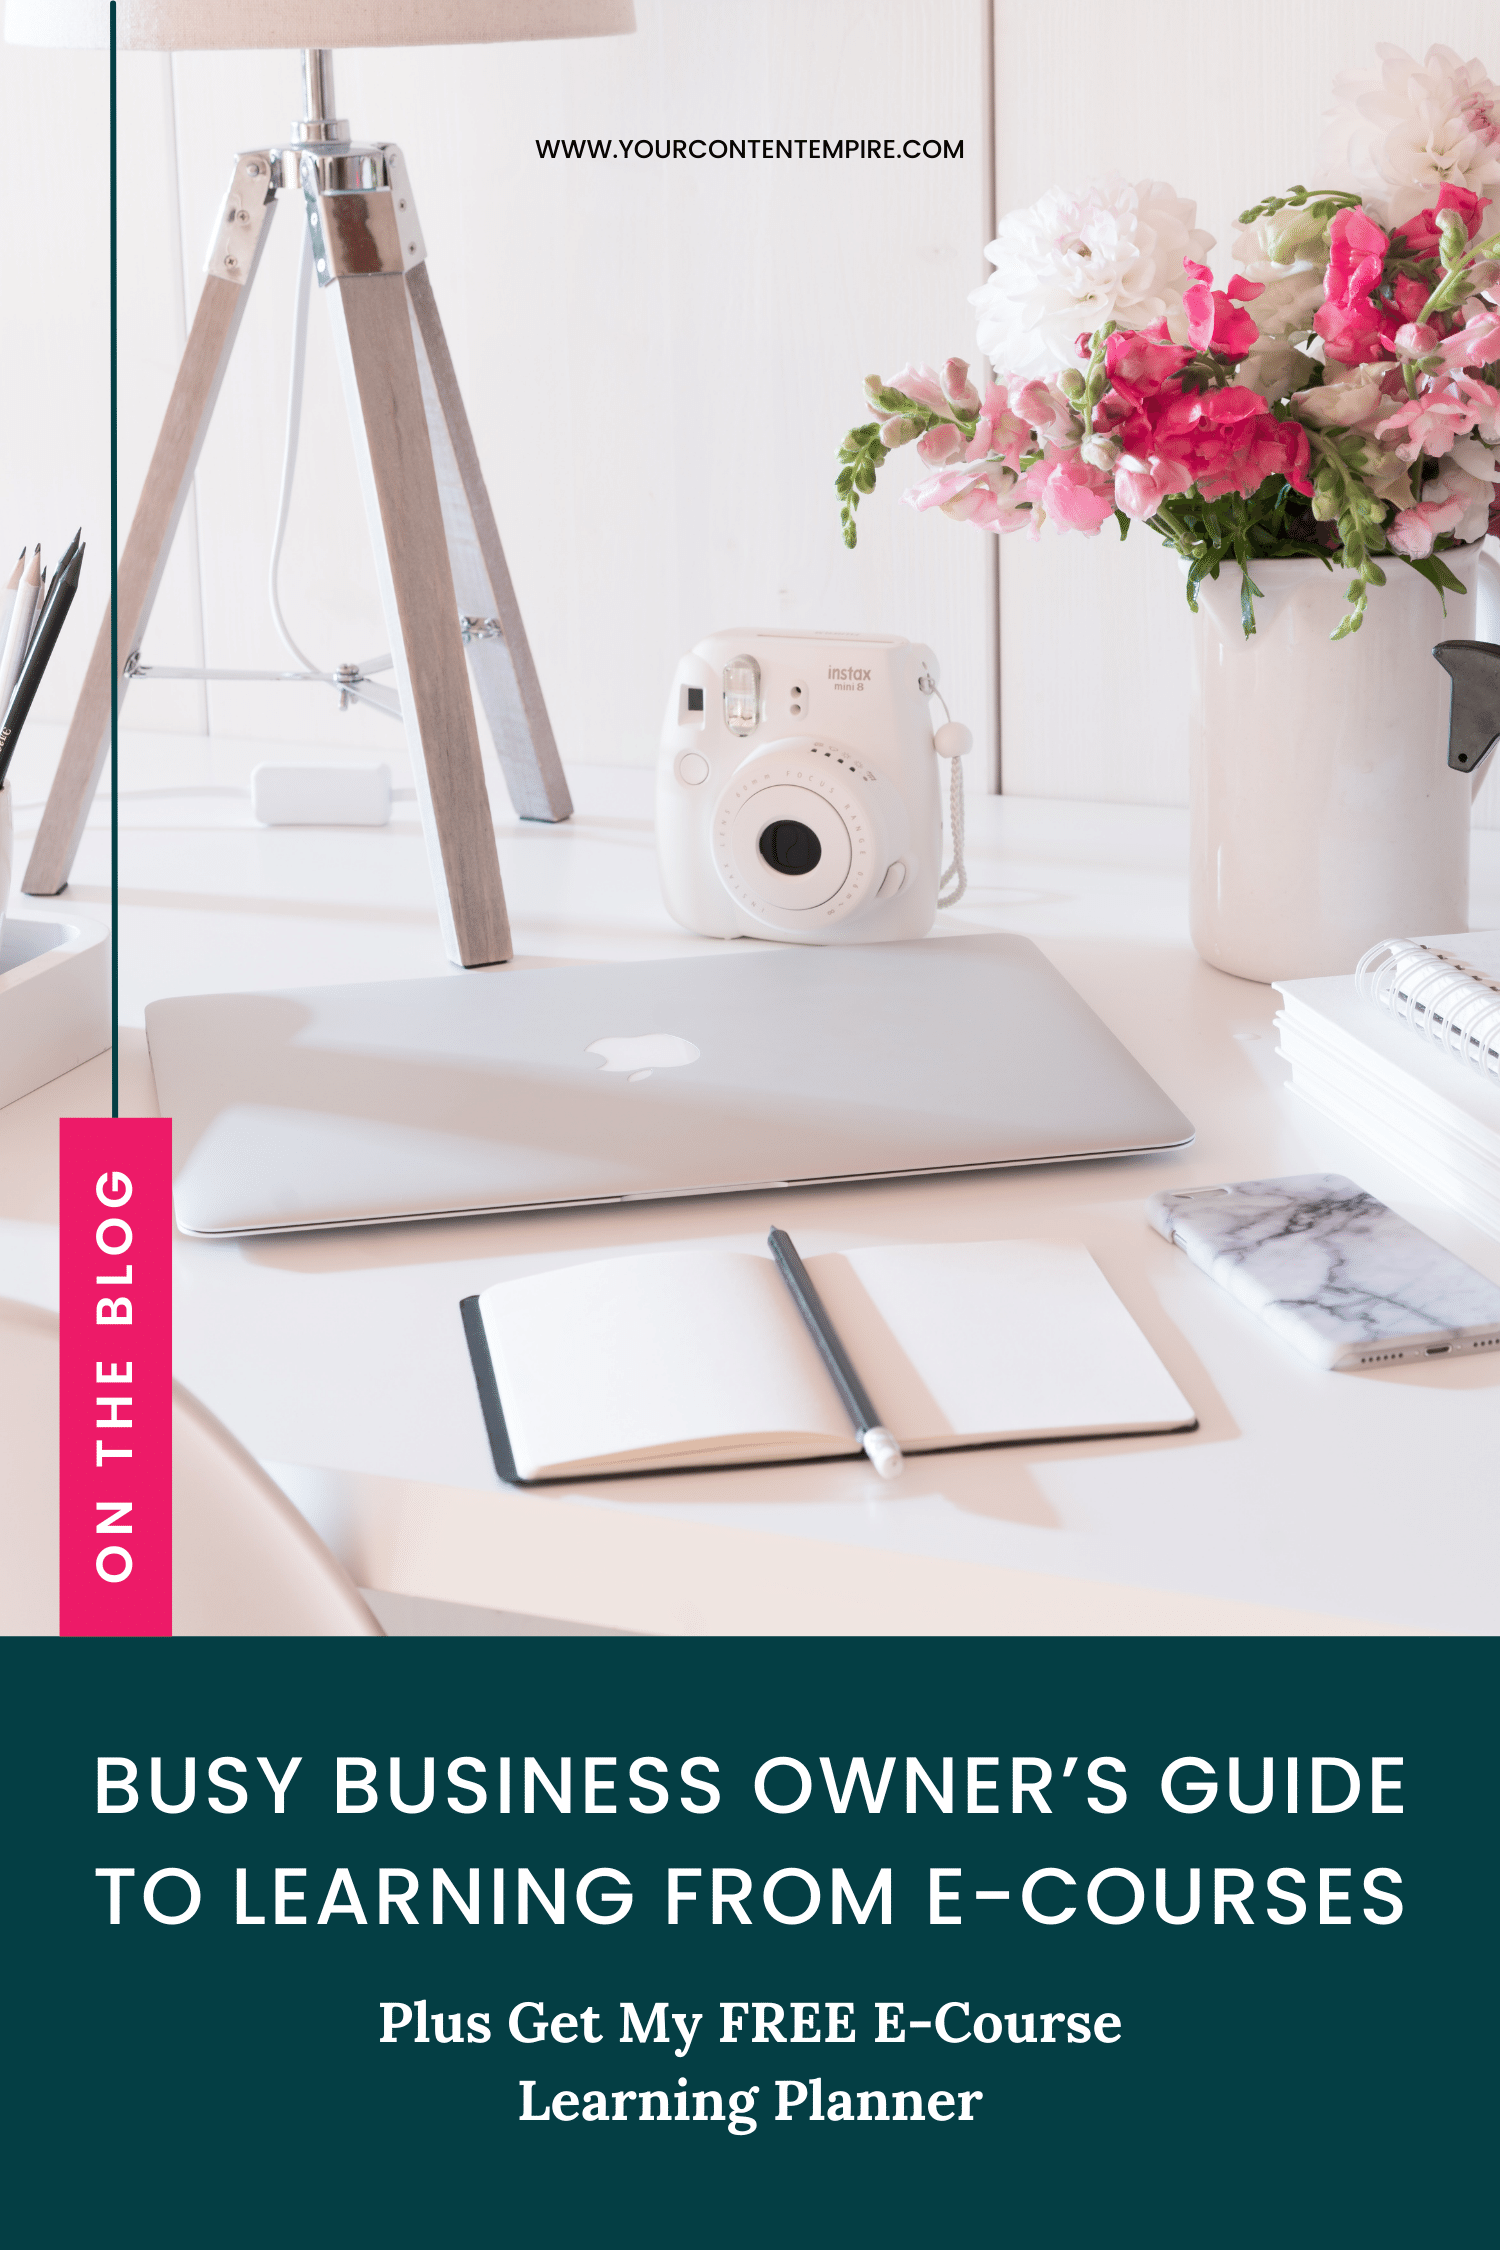 Busy Business Owner’s Guide to Learning from E-Courses